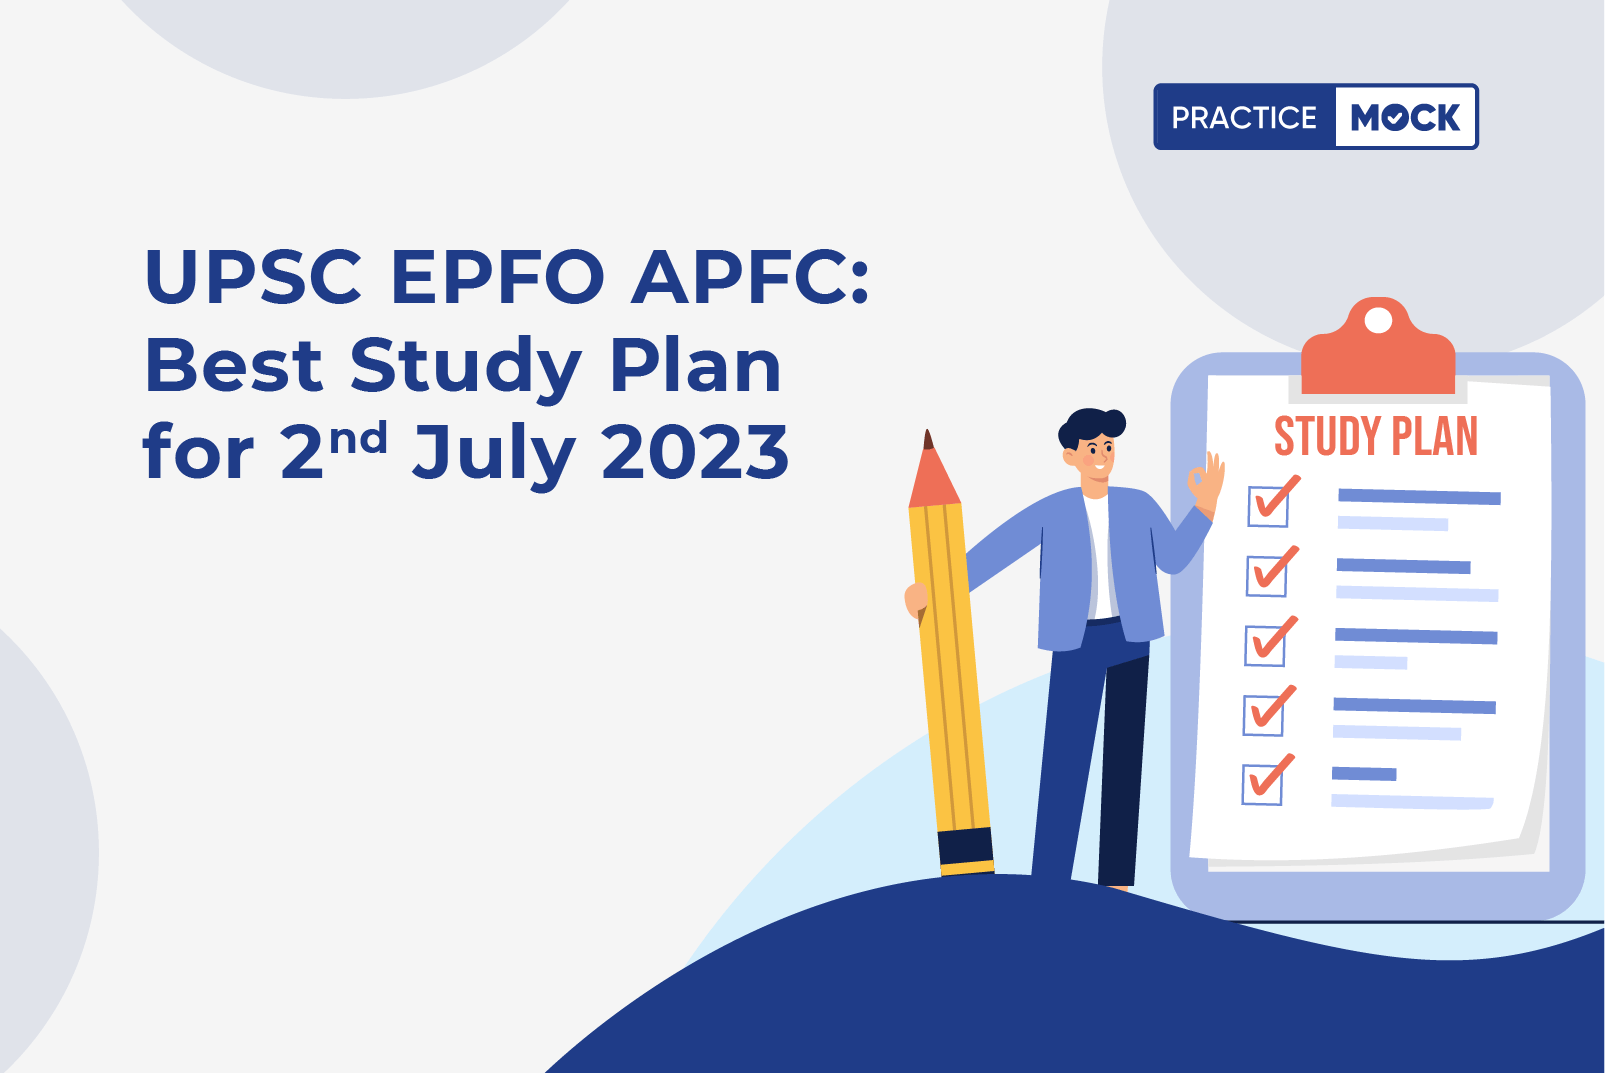 UPSC EPFO APFC 2023-Best Study Plan for 2nd July 2023